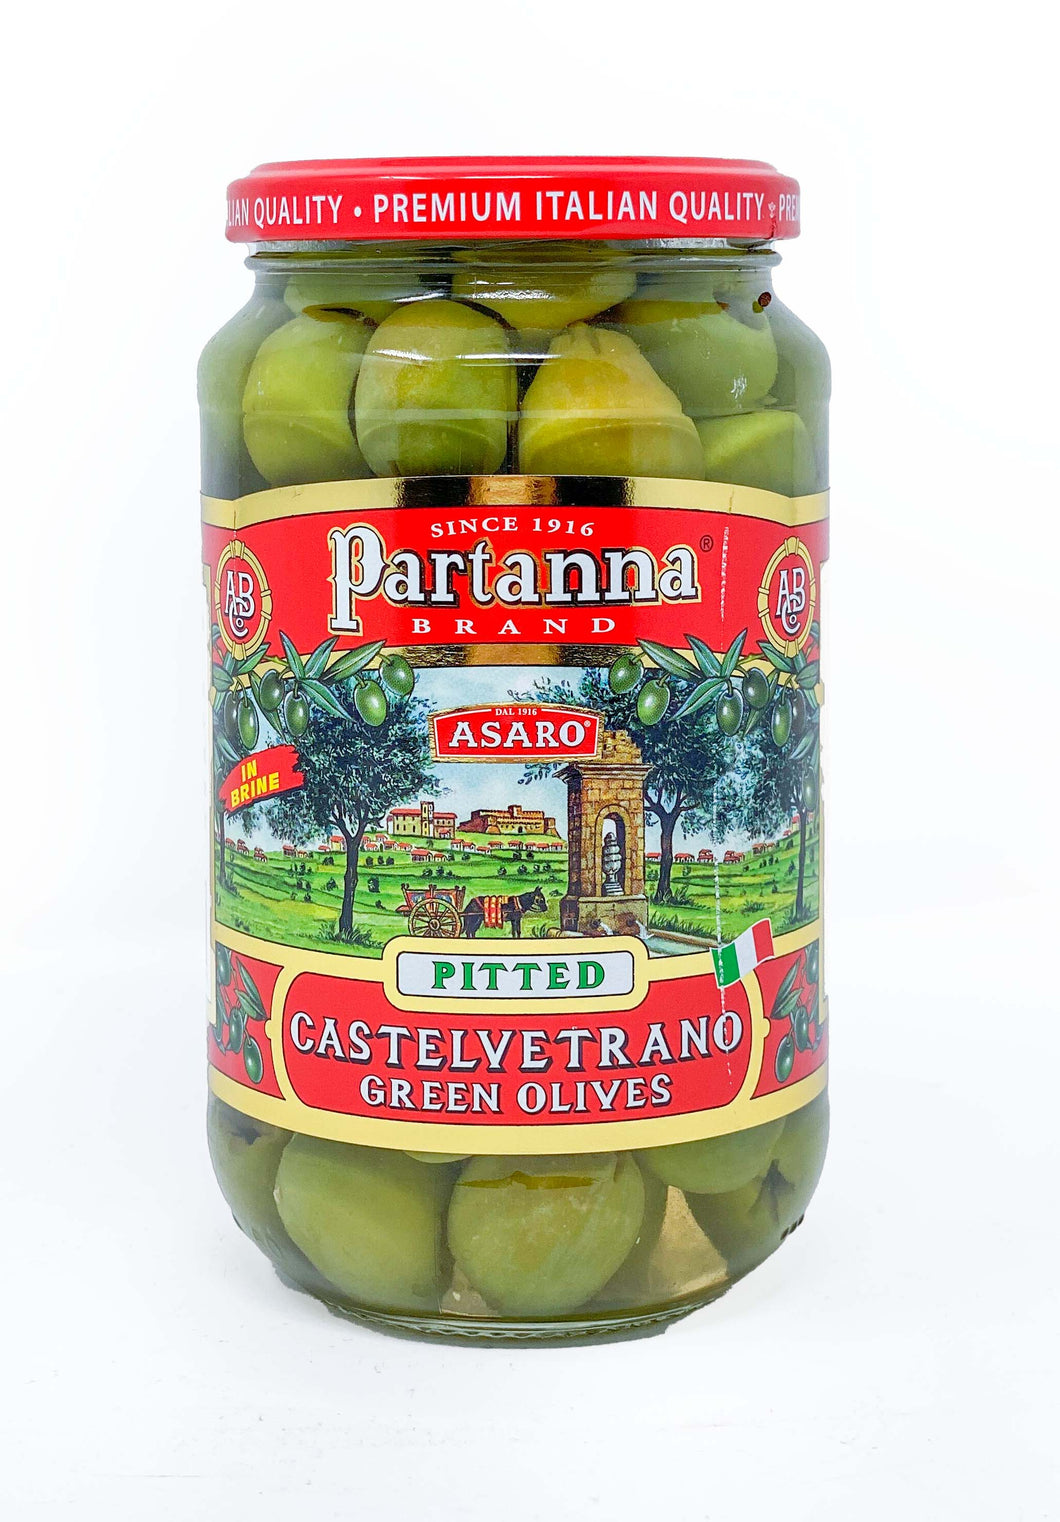 Partanna Castelvetrano Green Olives PITTED or WHOLE